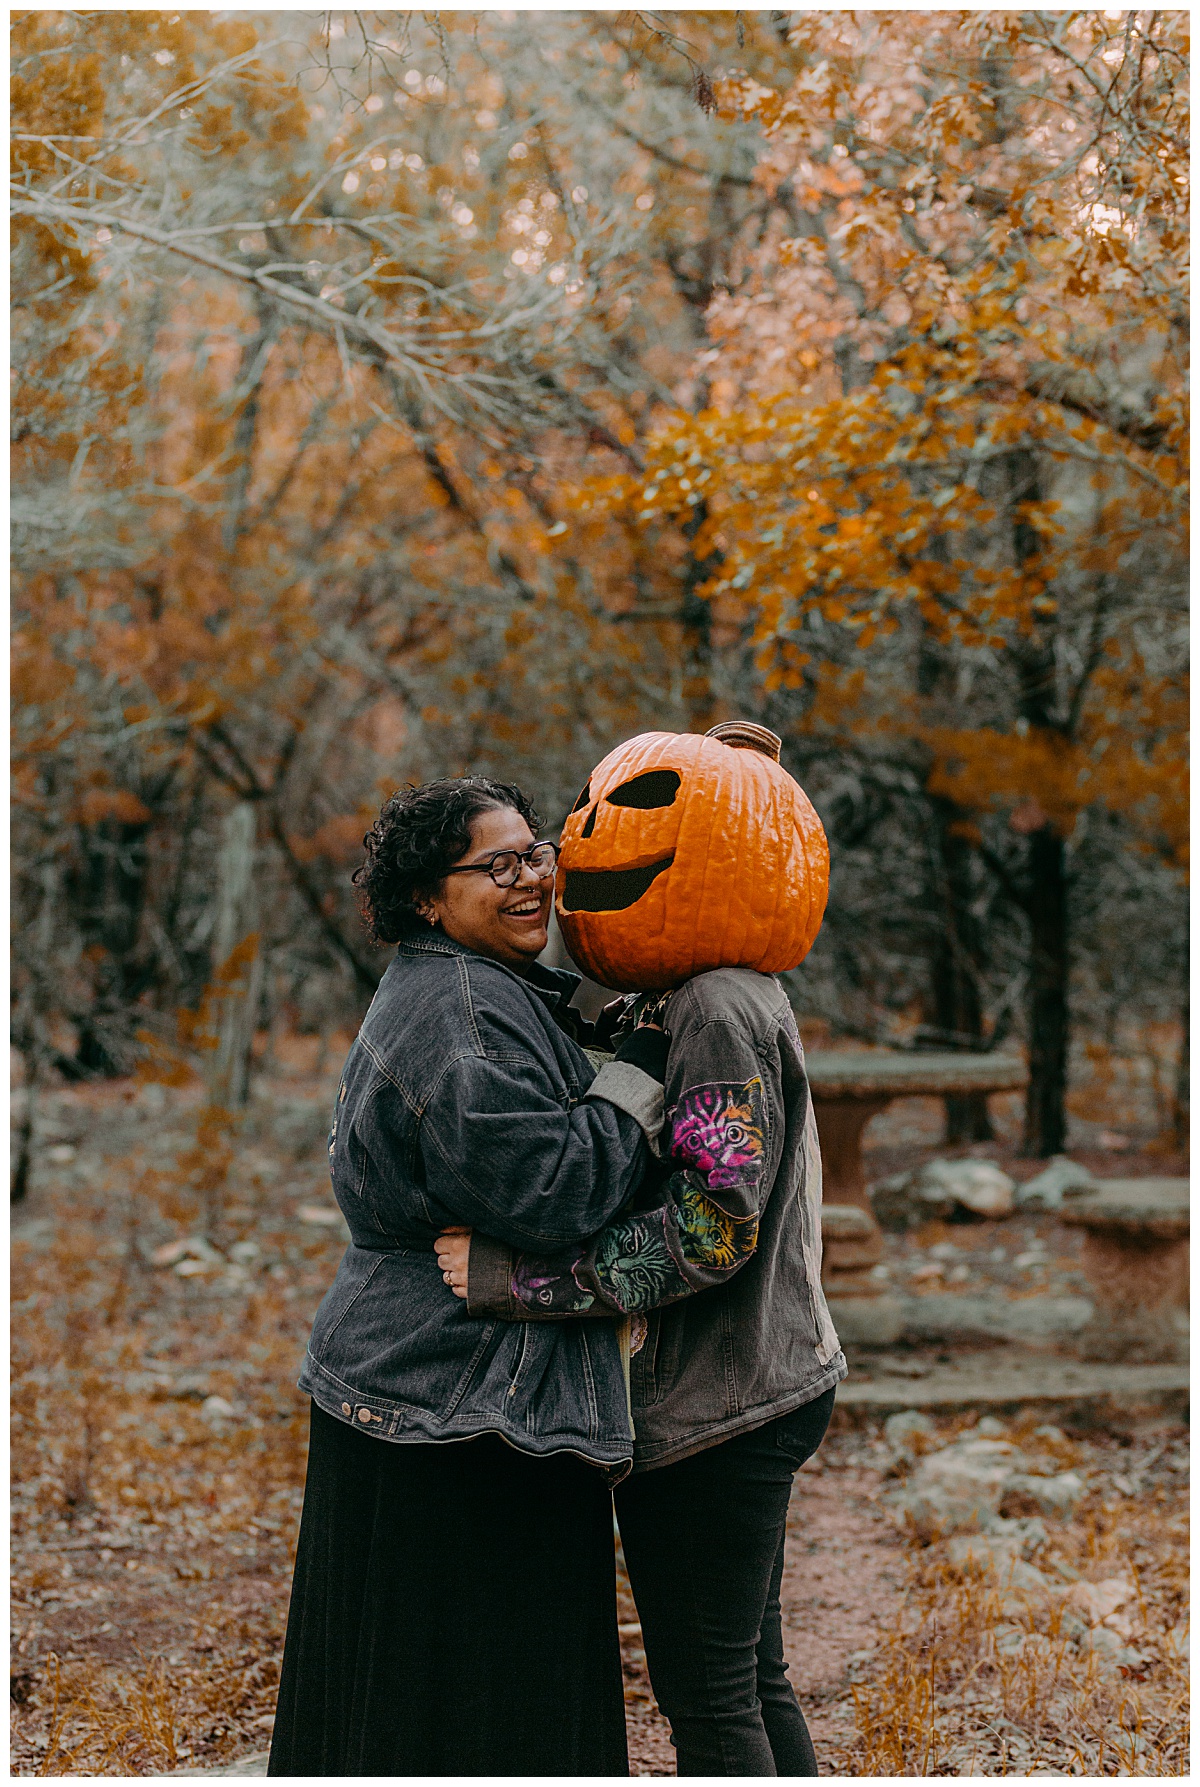 partners embrace in wooded area in the fall while one wears a pumpkin head by Austin portrait photographer